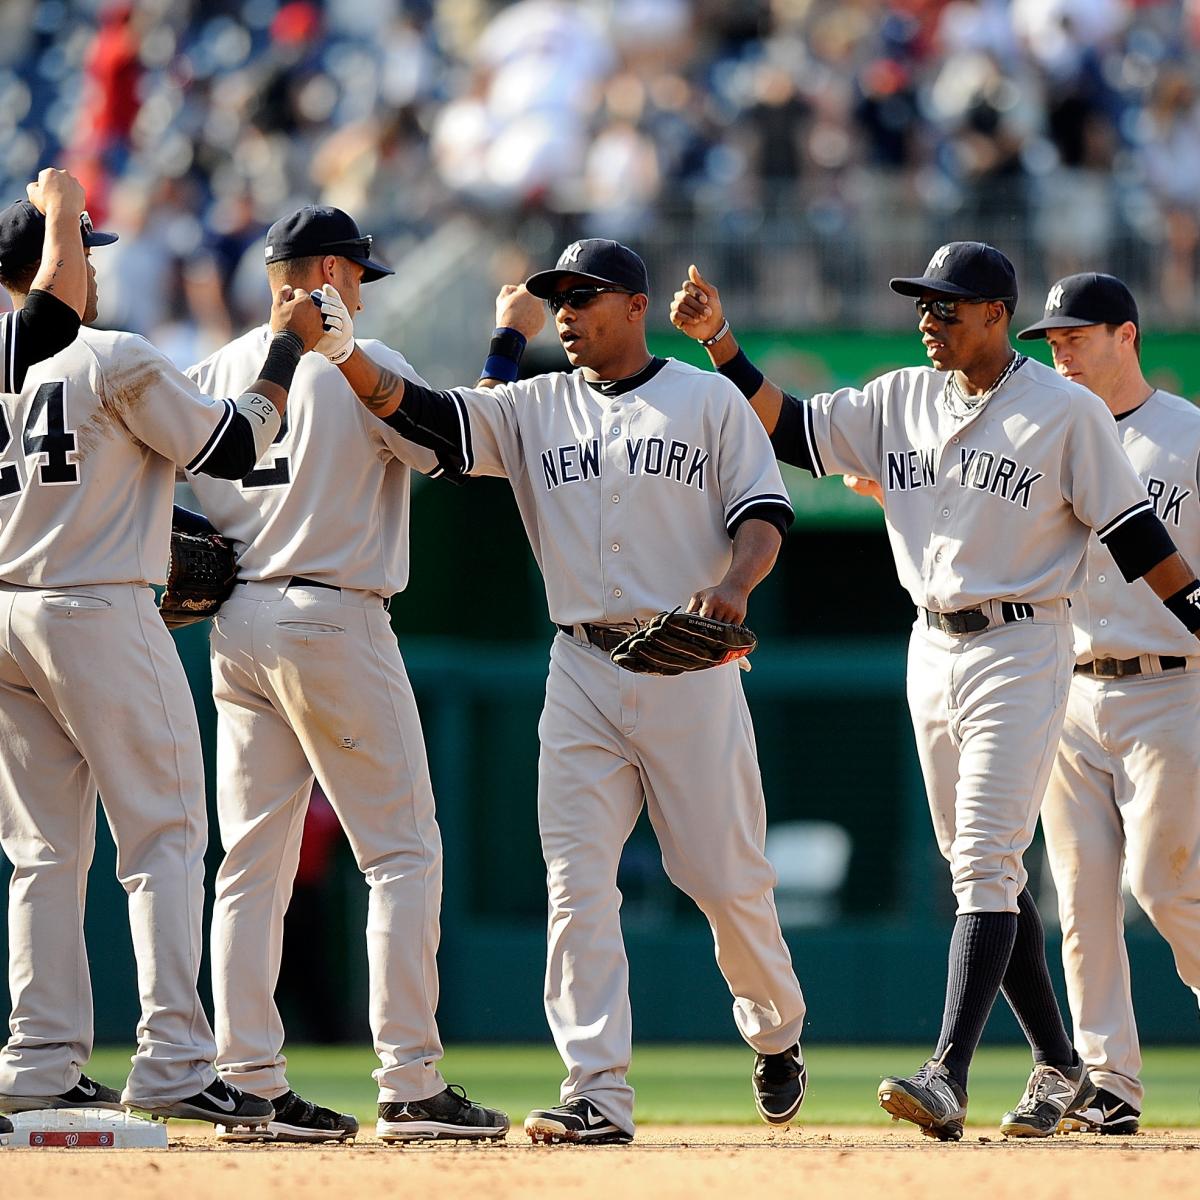 Braves vs. Yankees Live Stream, Injuries, Pitching Matchups and